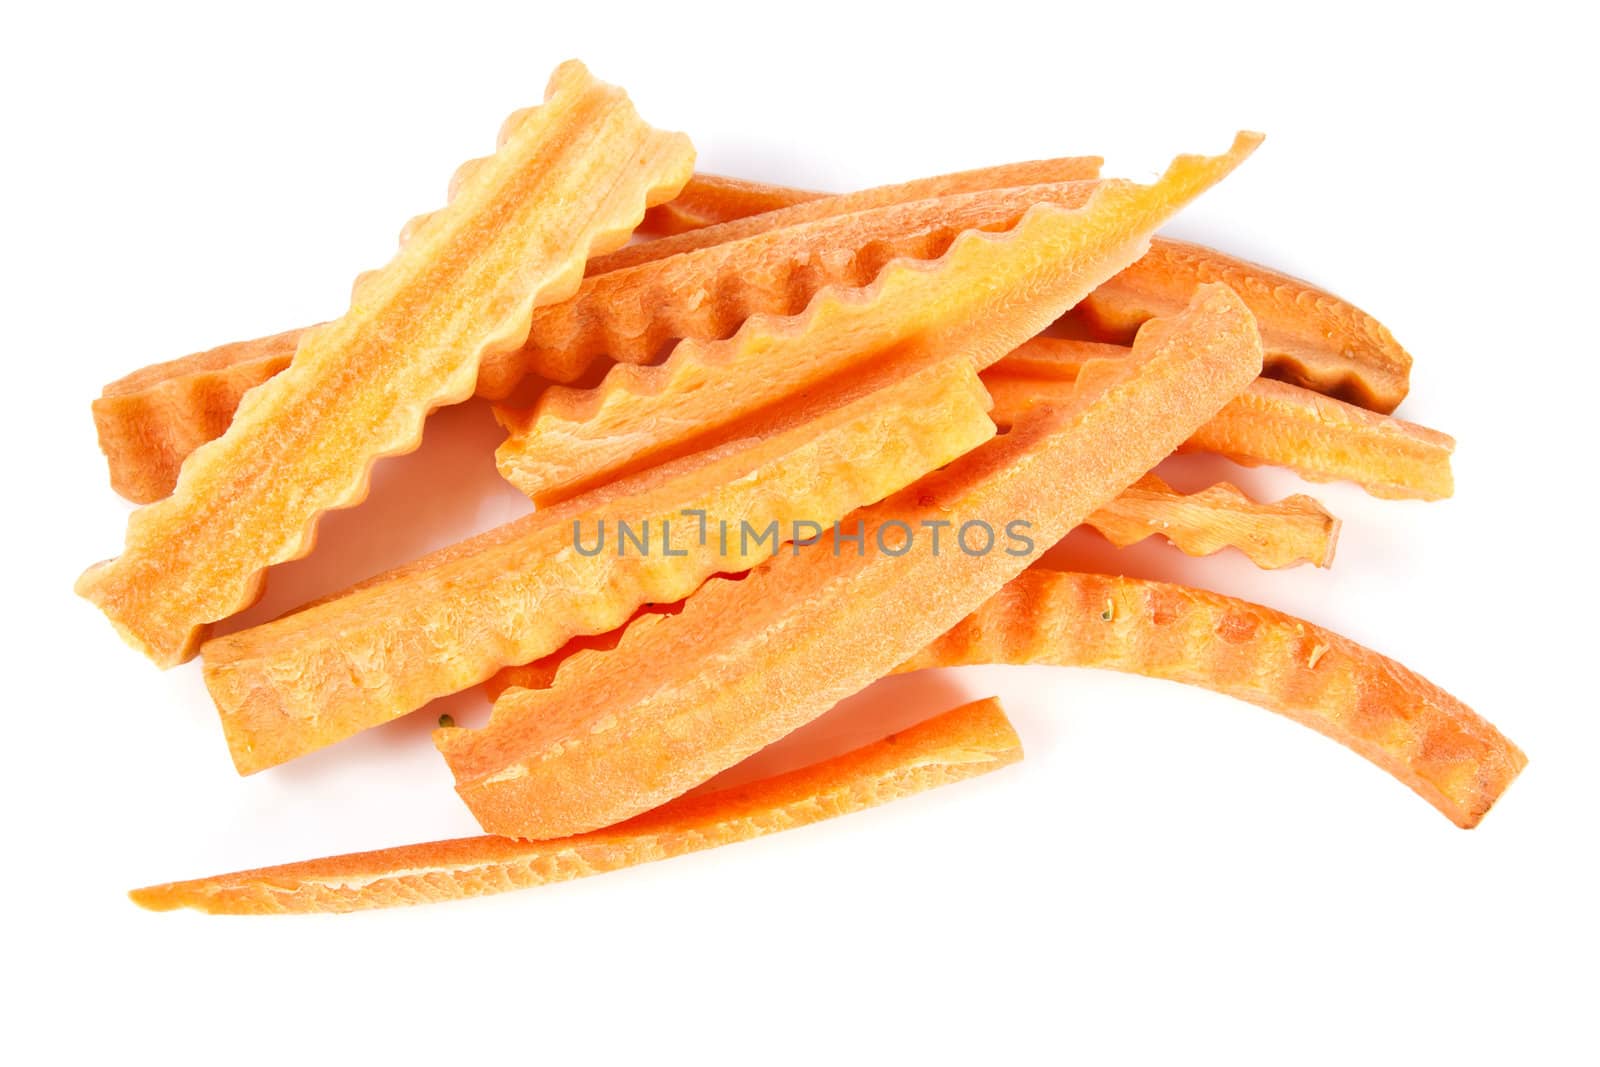 Portion of carrots, spiced carrot Long slices